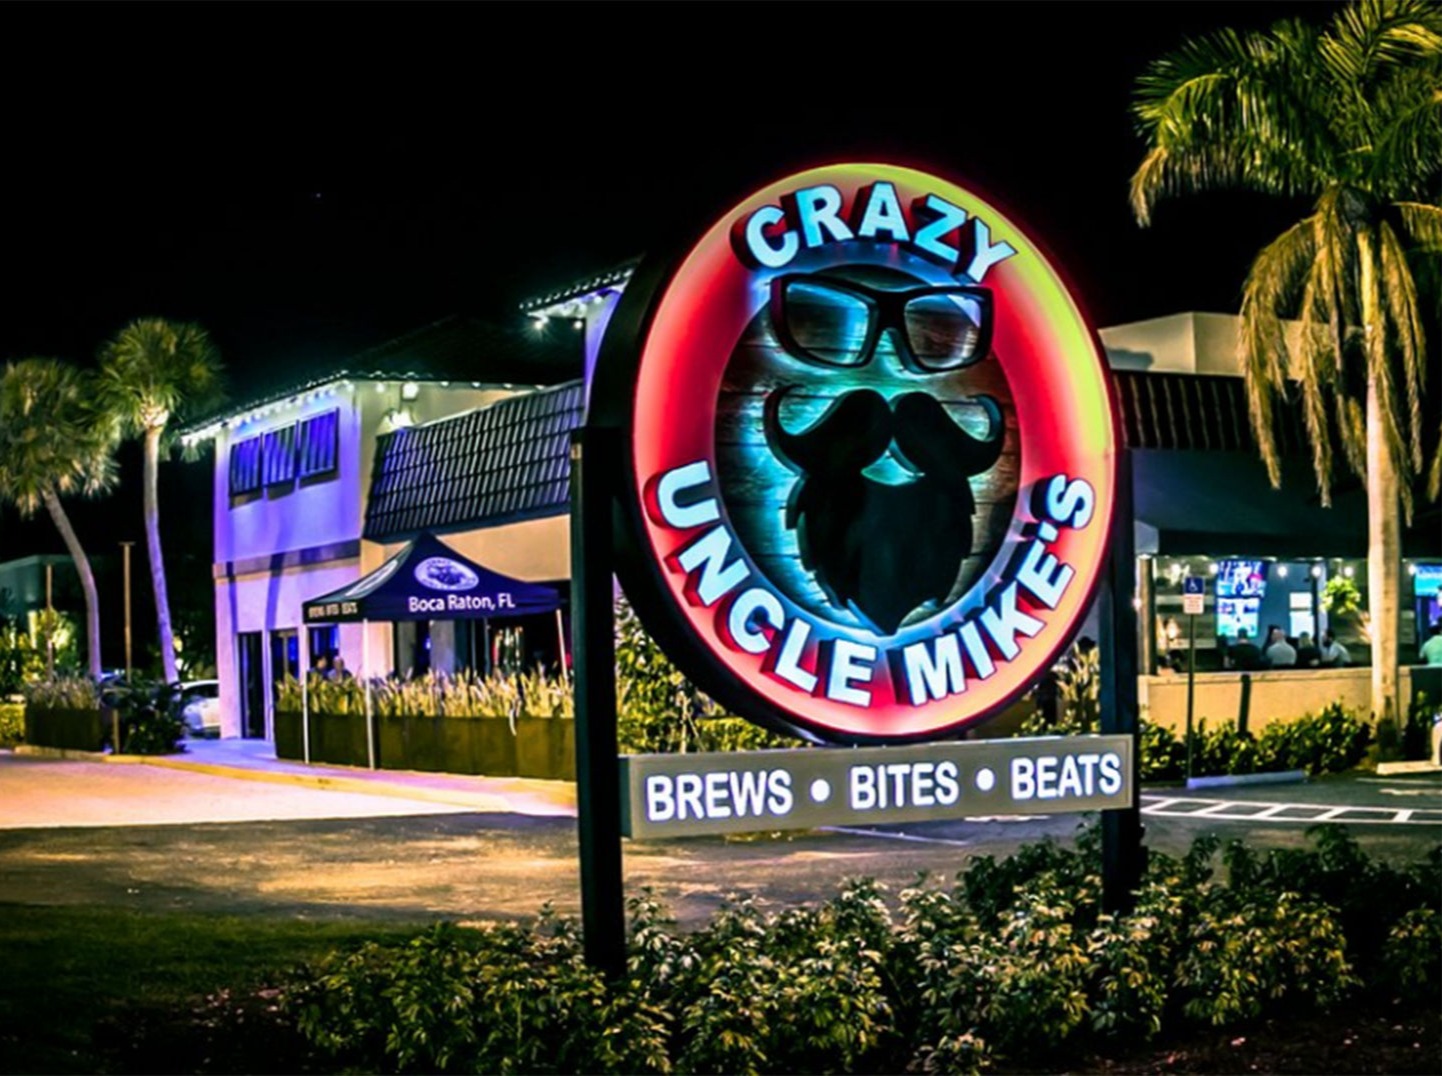 Rock Me On The Water - Crazy Uncle Mike's Boca Raton